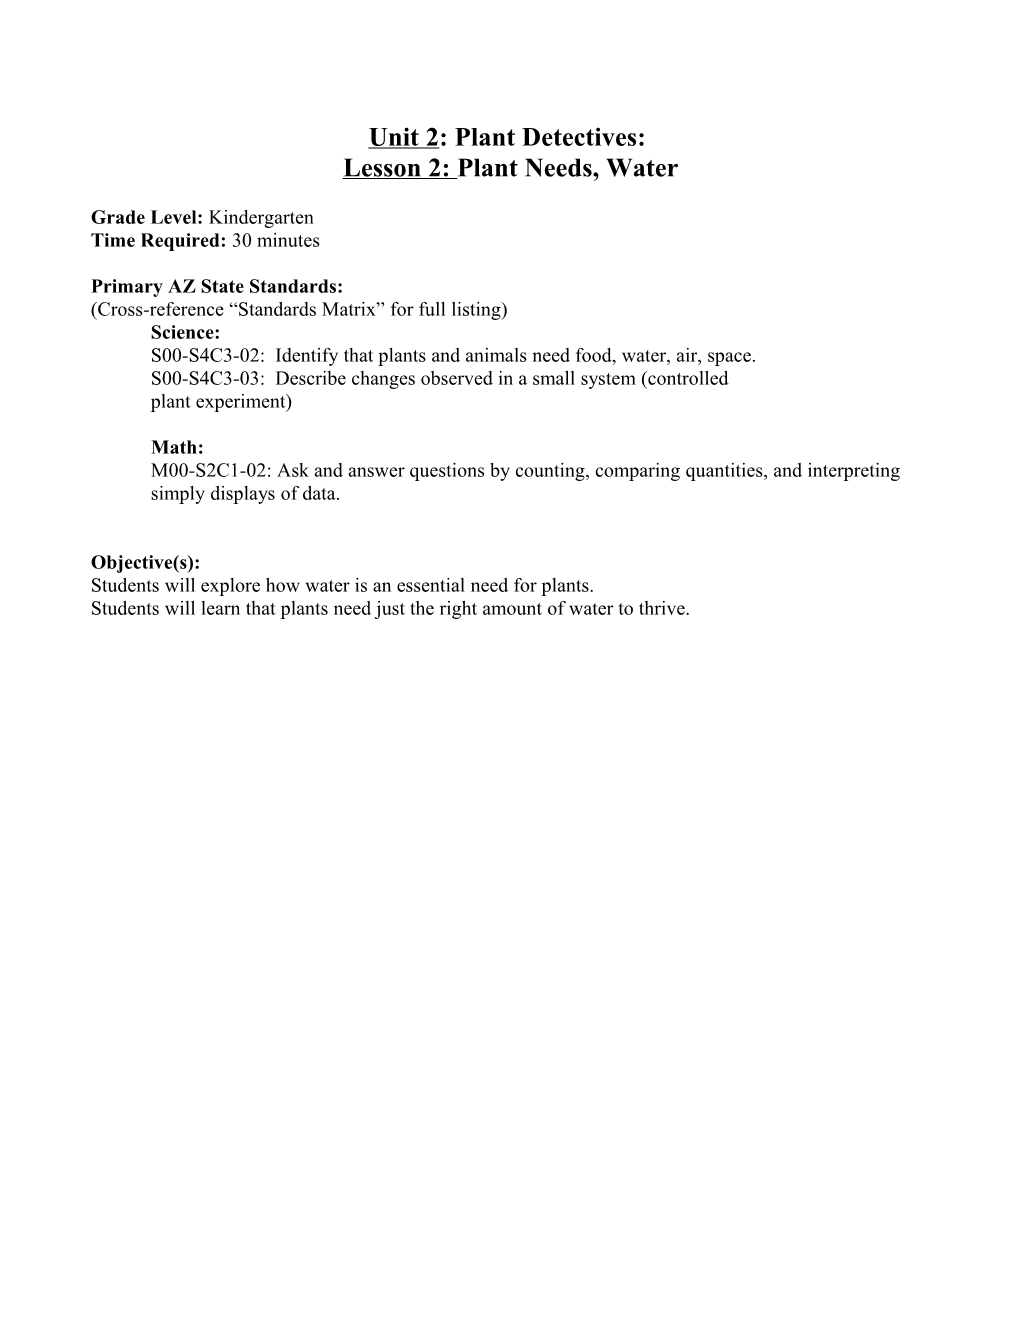 Lesson 2: Plant Needs, Water